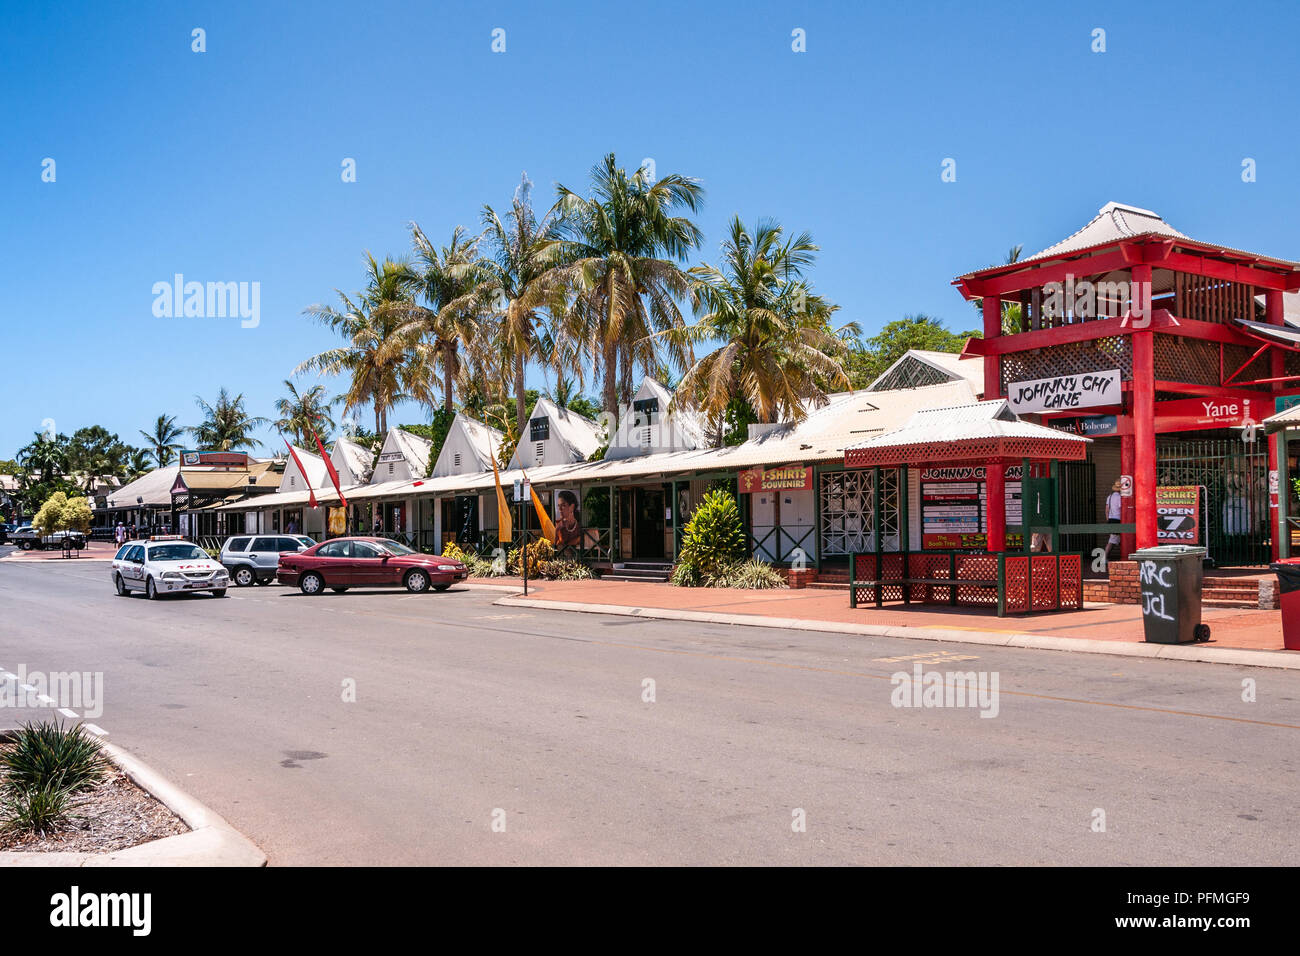 Broome, WA, Australia - November 29, 2009: Street view with cars and people in front of white and red Johnny Chi Lane shopping mall with palm trees an Stock Photo